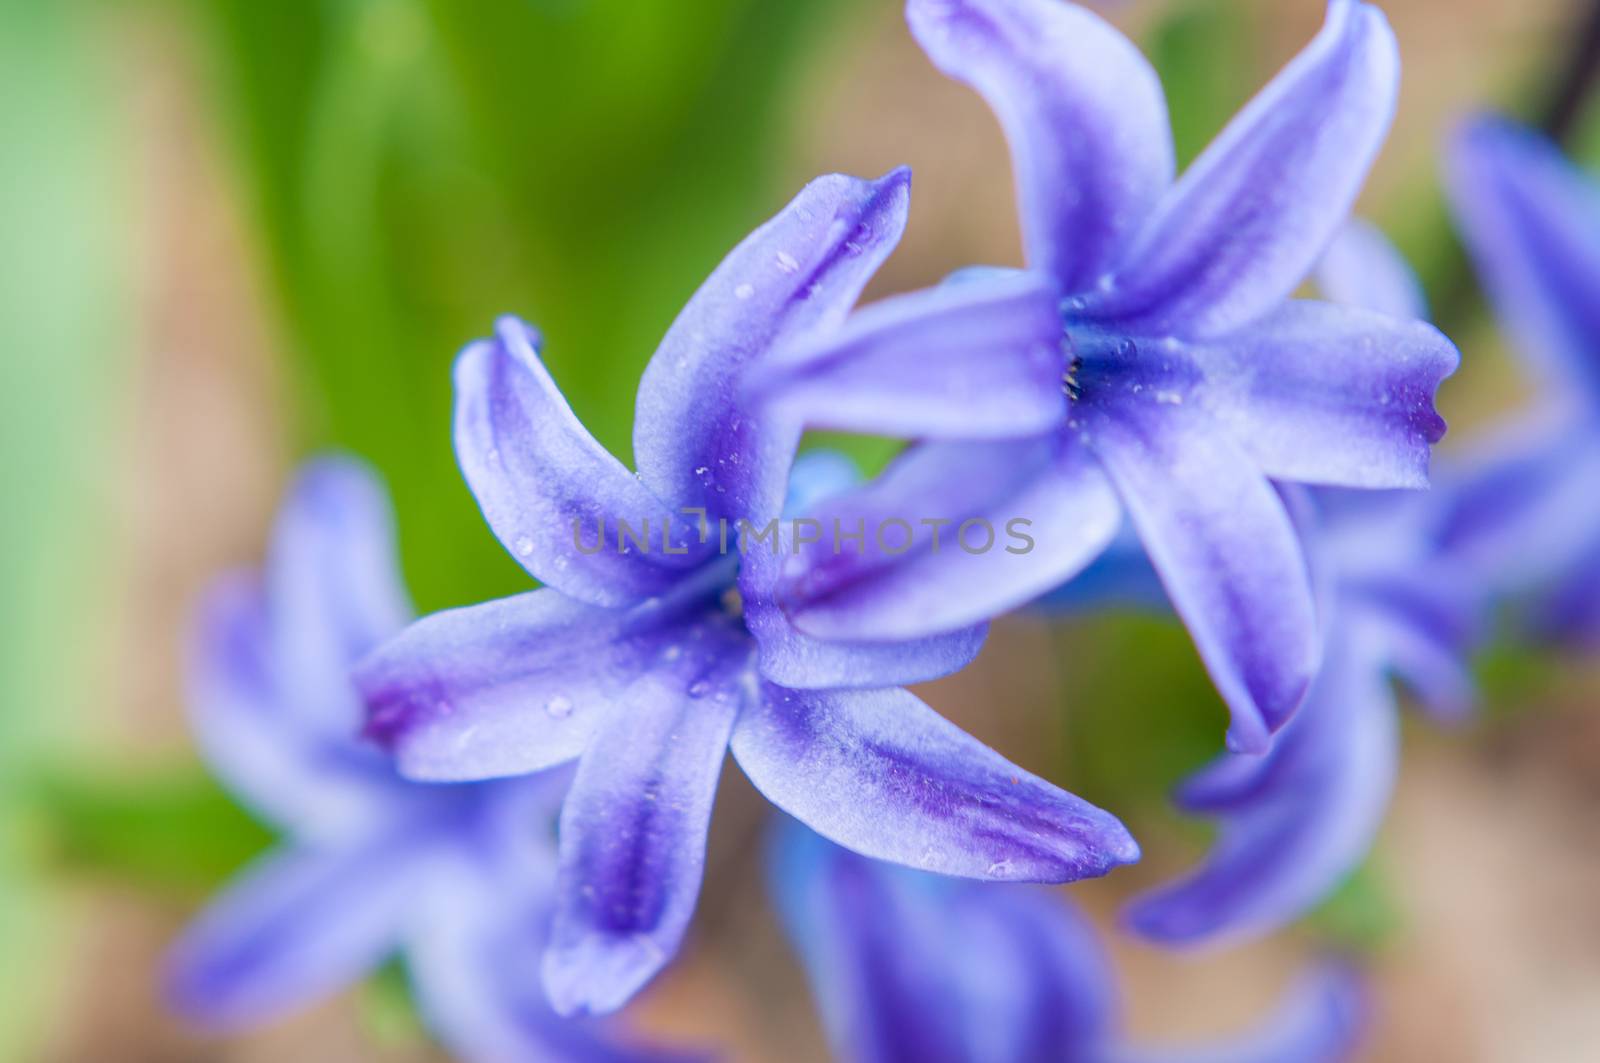 Flowers that appear to shift between purple and blue under the naked eye